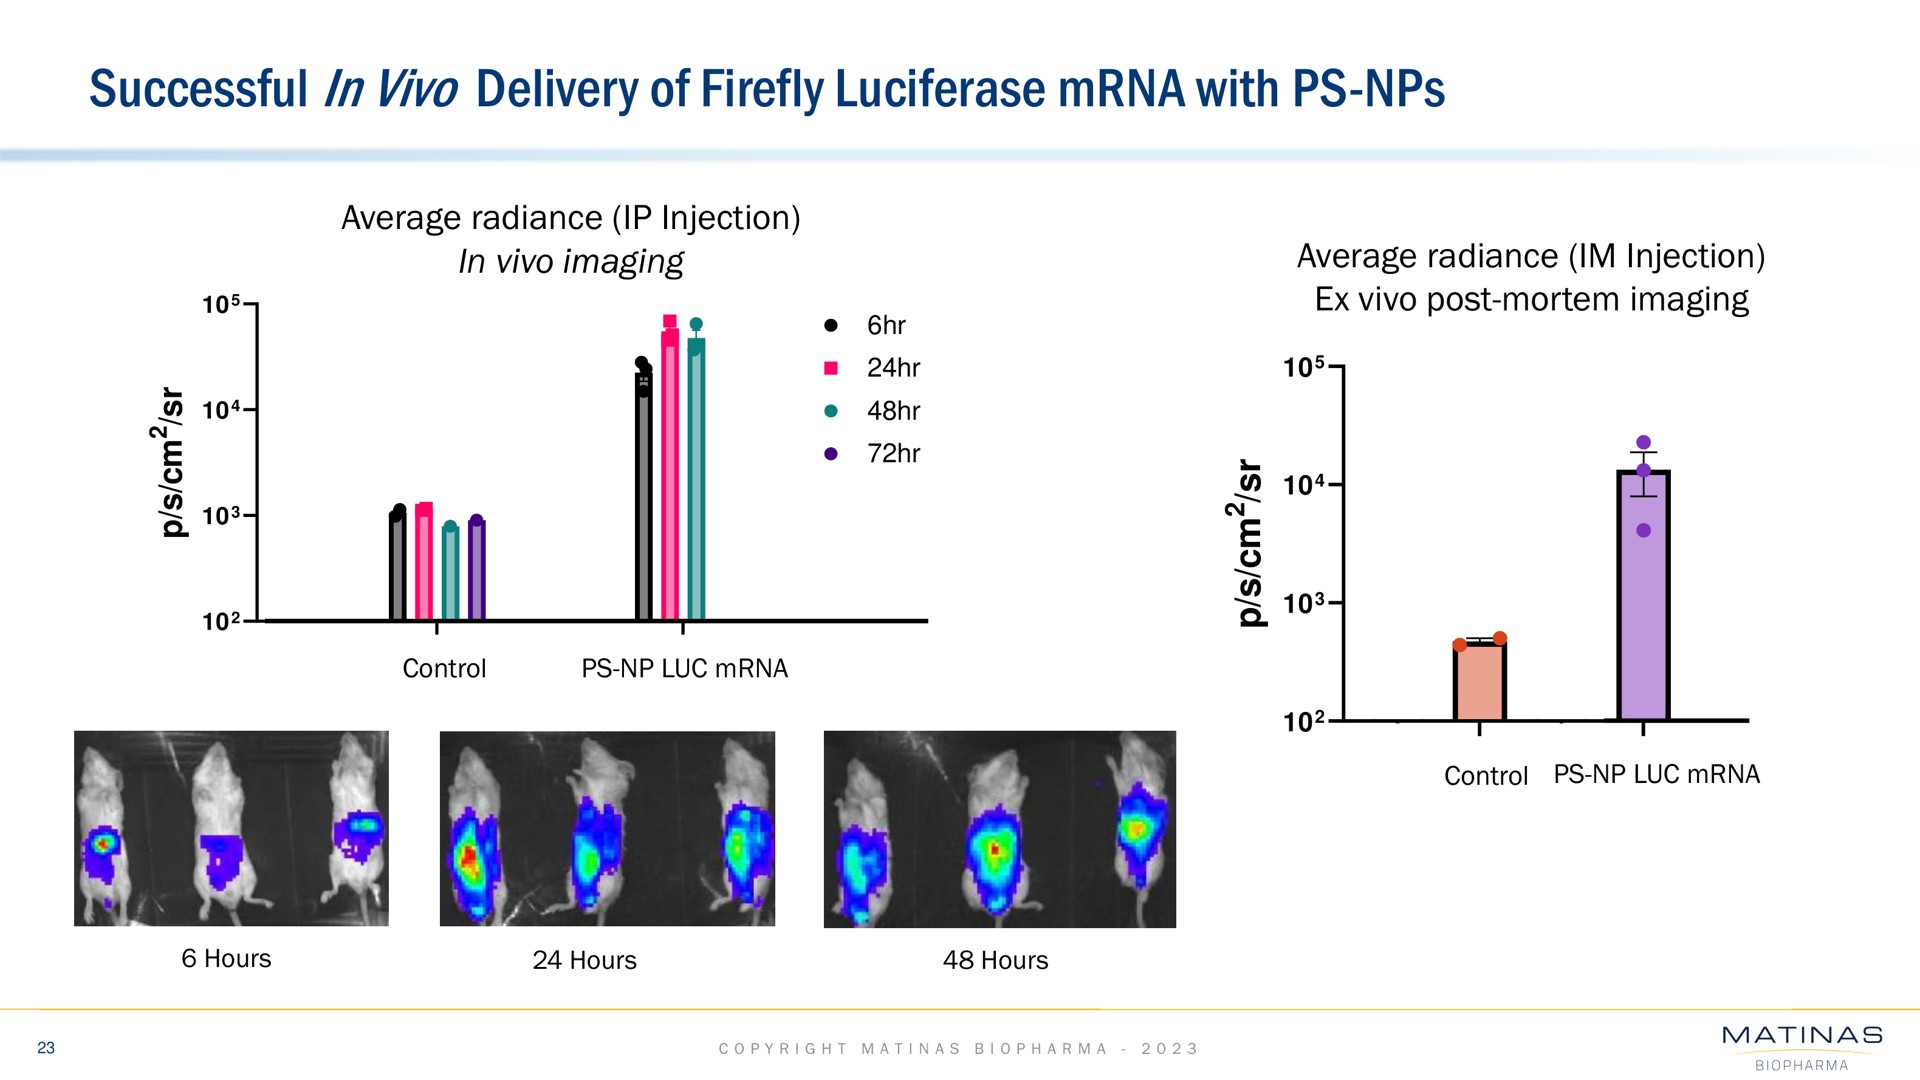 successful in delivery of firefly luciferase with | Matinas BioPharma